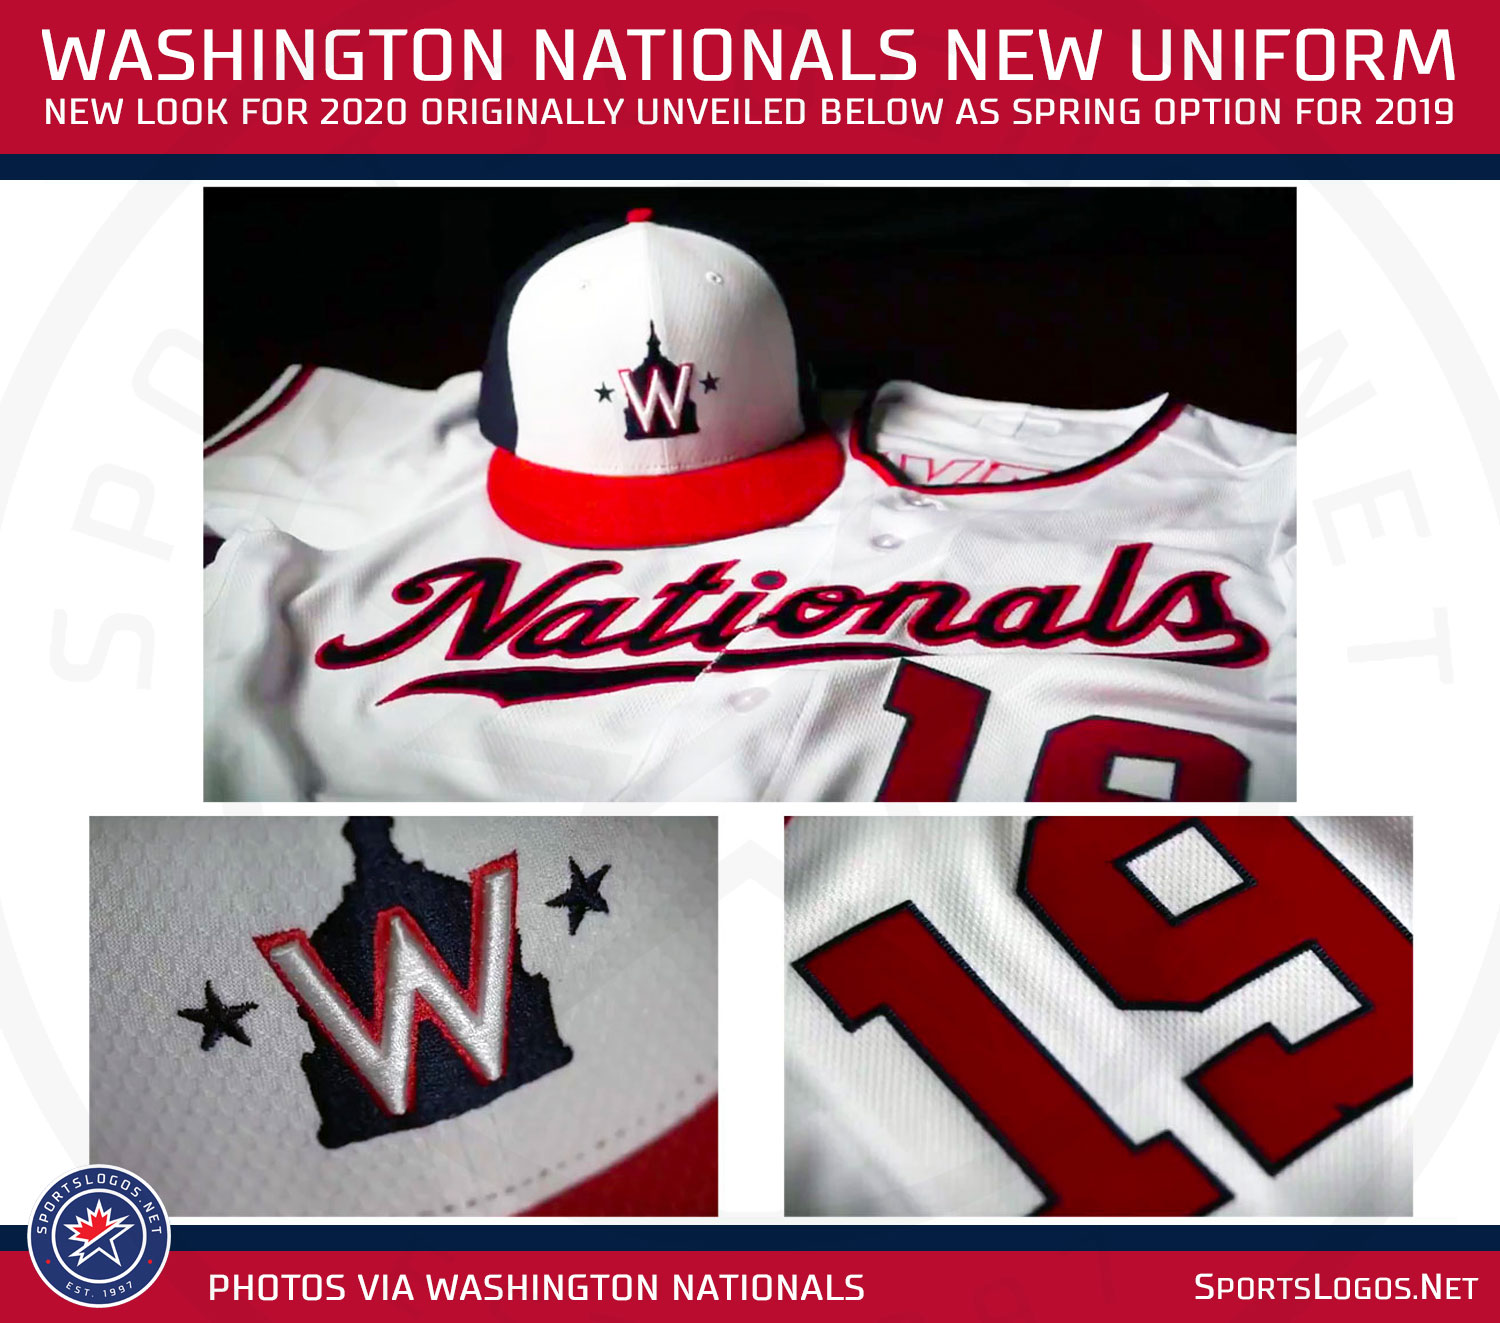 Two New Caps and a New Jersey for Nationals in 2020 – SportsLogos.Net News